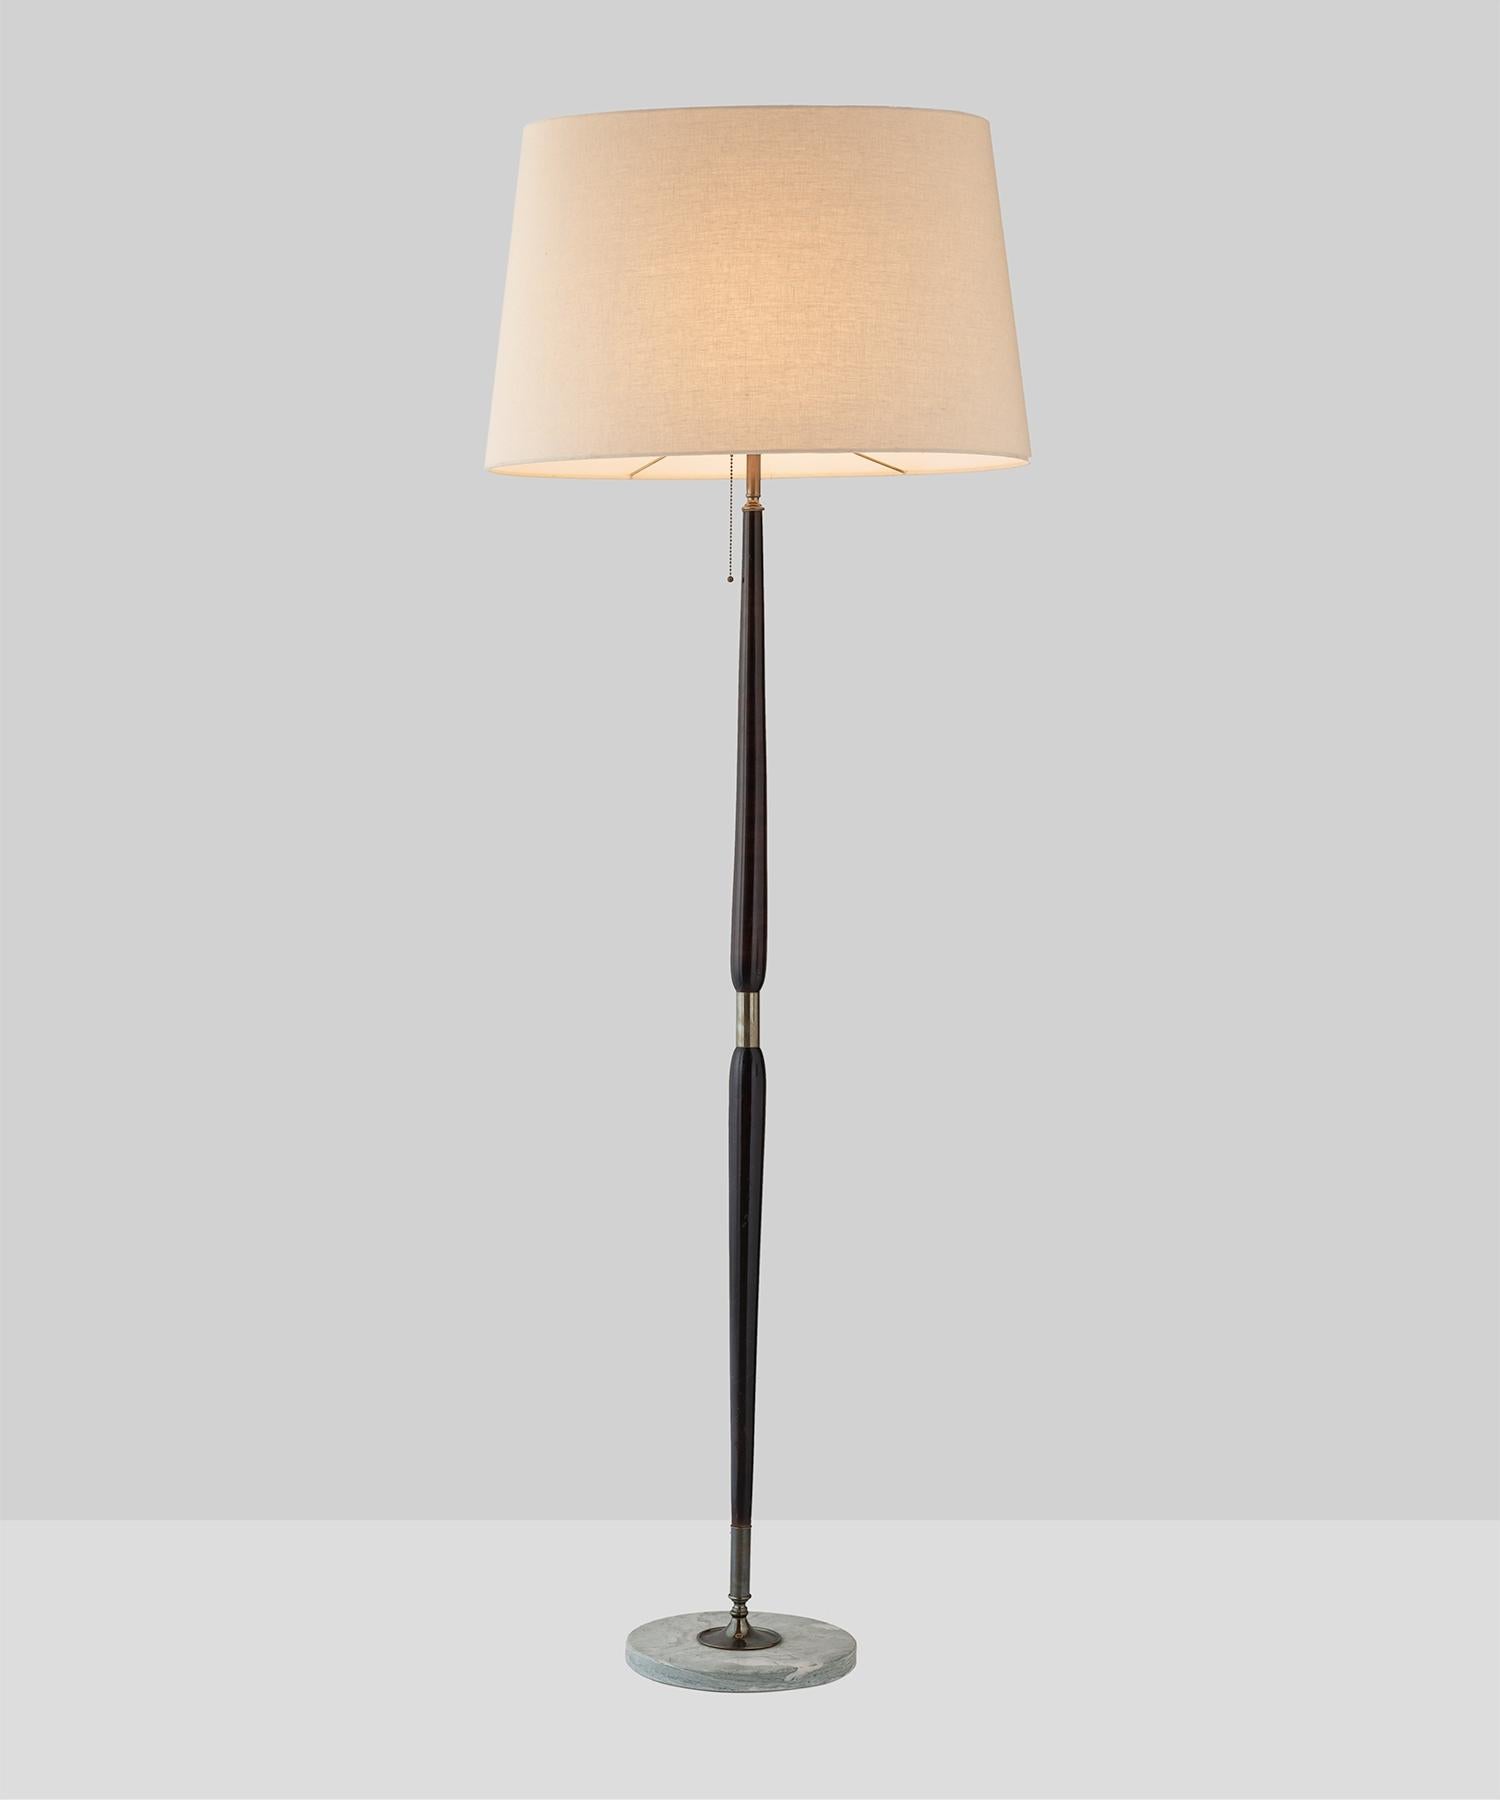 Wood & marble floor lamp, Italy, circa 1950.

Tapered wooden rod with brass detailing and marble base. New oblong linen shade.